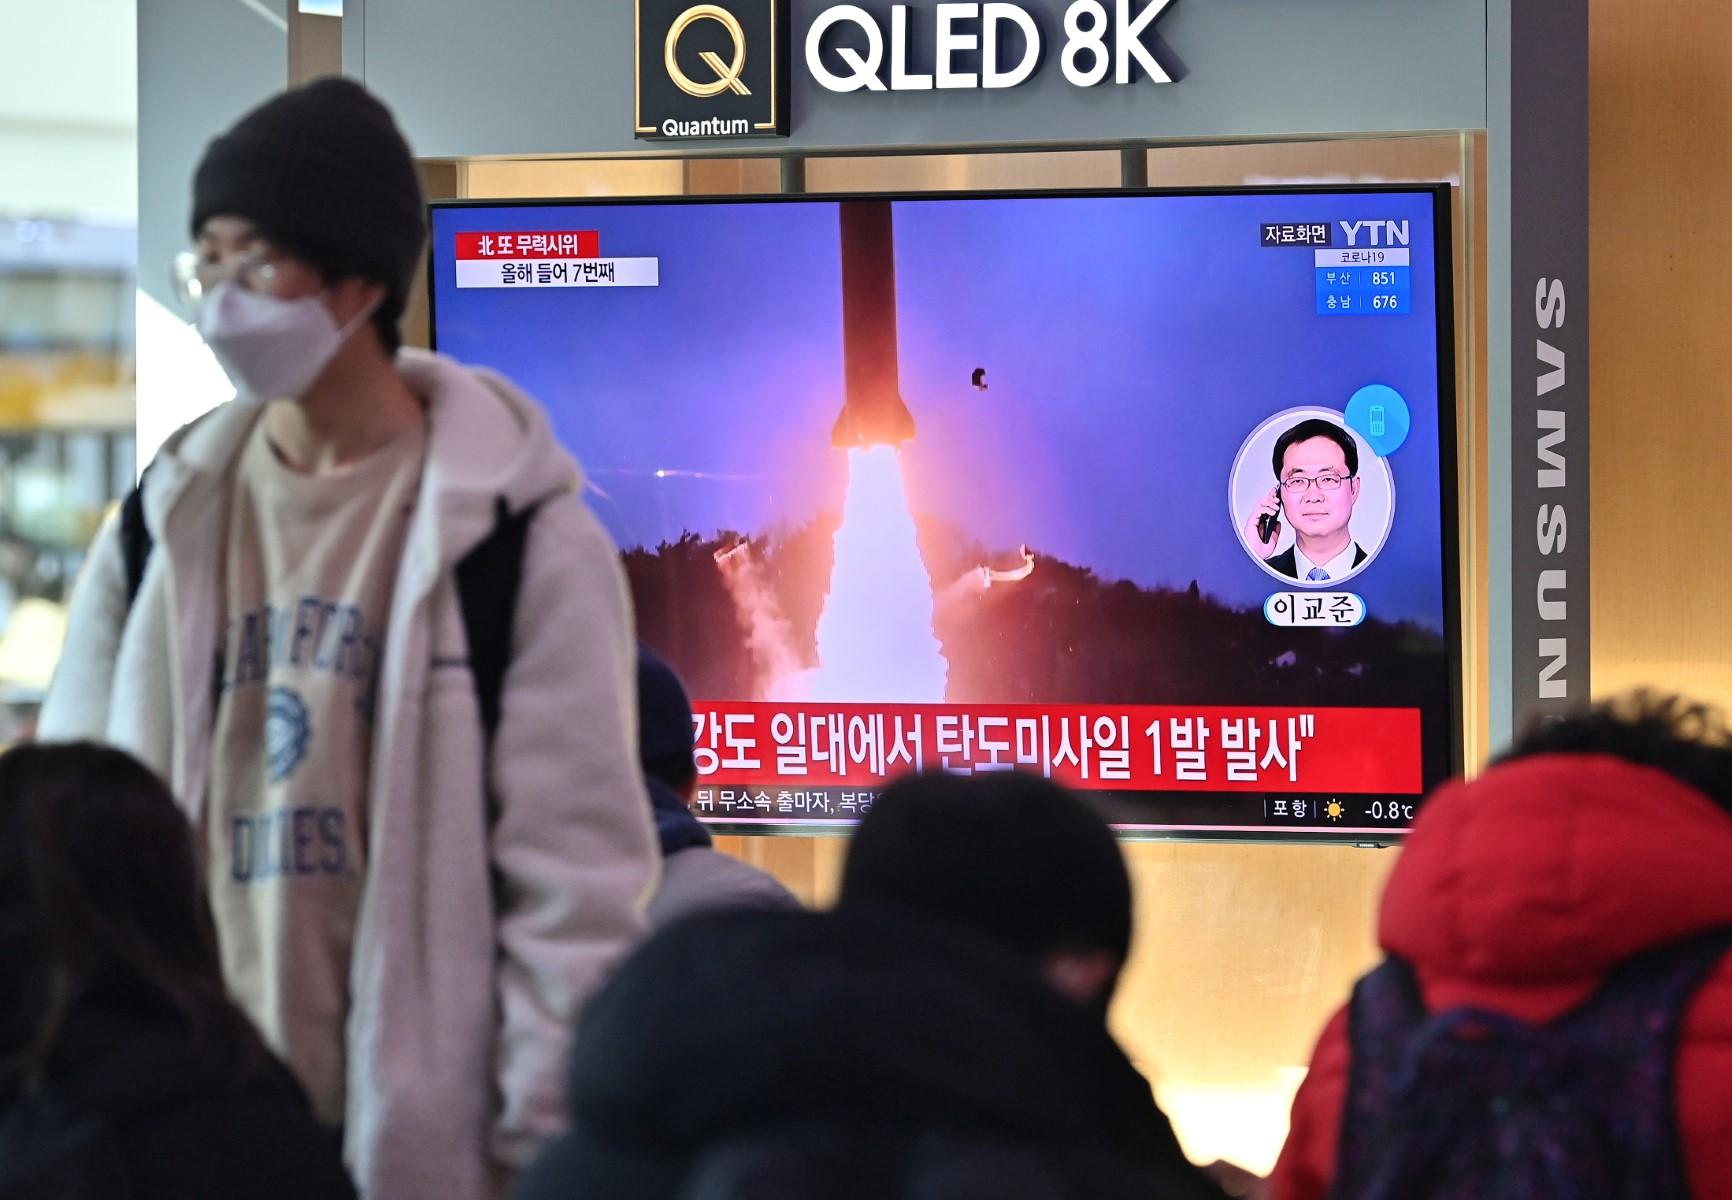 People watch a television screen showing a news broadcast with file footage of a North Korean missile test, at a railway station in Seoul on Jan 30, after North Korea fired a 'suspected ballistic missile' in the country's seventh weapons test this month according to the South's military. Photo: AFP